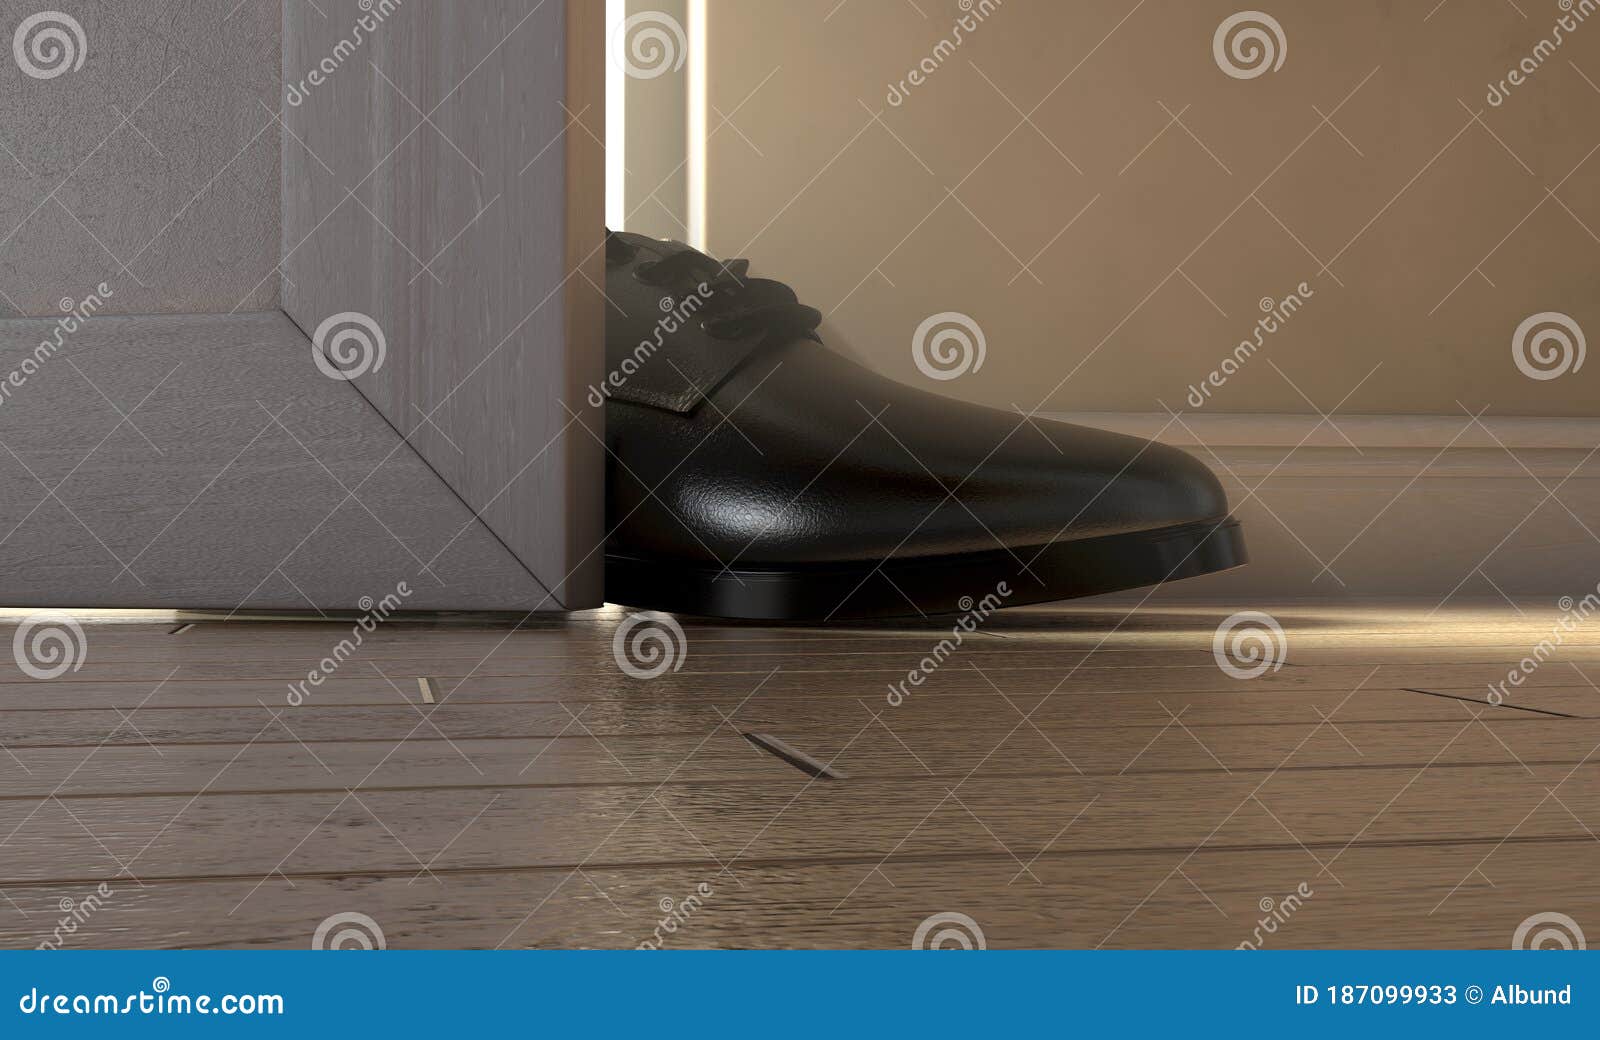 Get a Foot in the Door stock illustration. Illustration of wedged ...